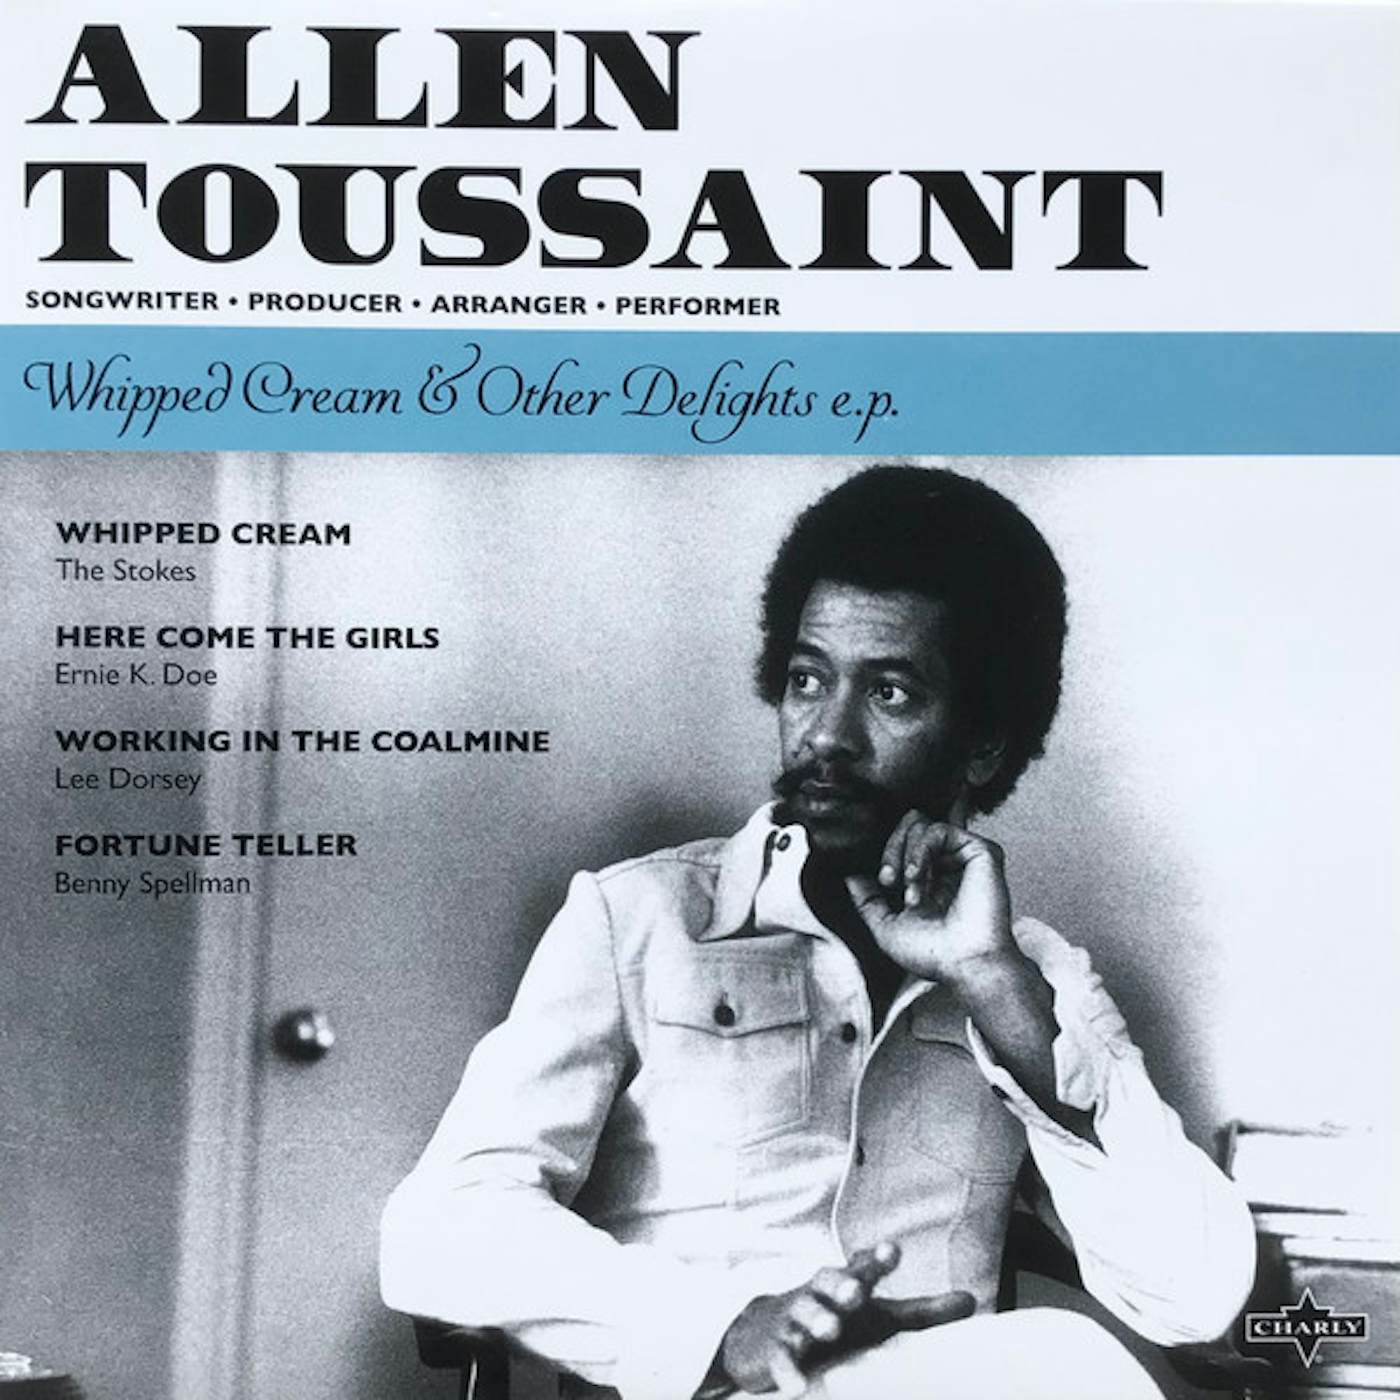 Allen Toussaint Whipped Cream & Other Delights vinyl record